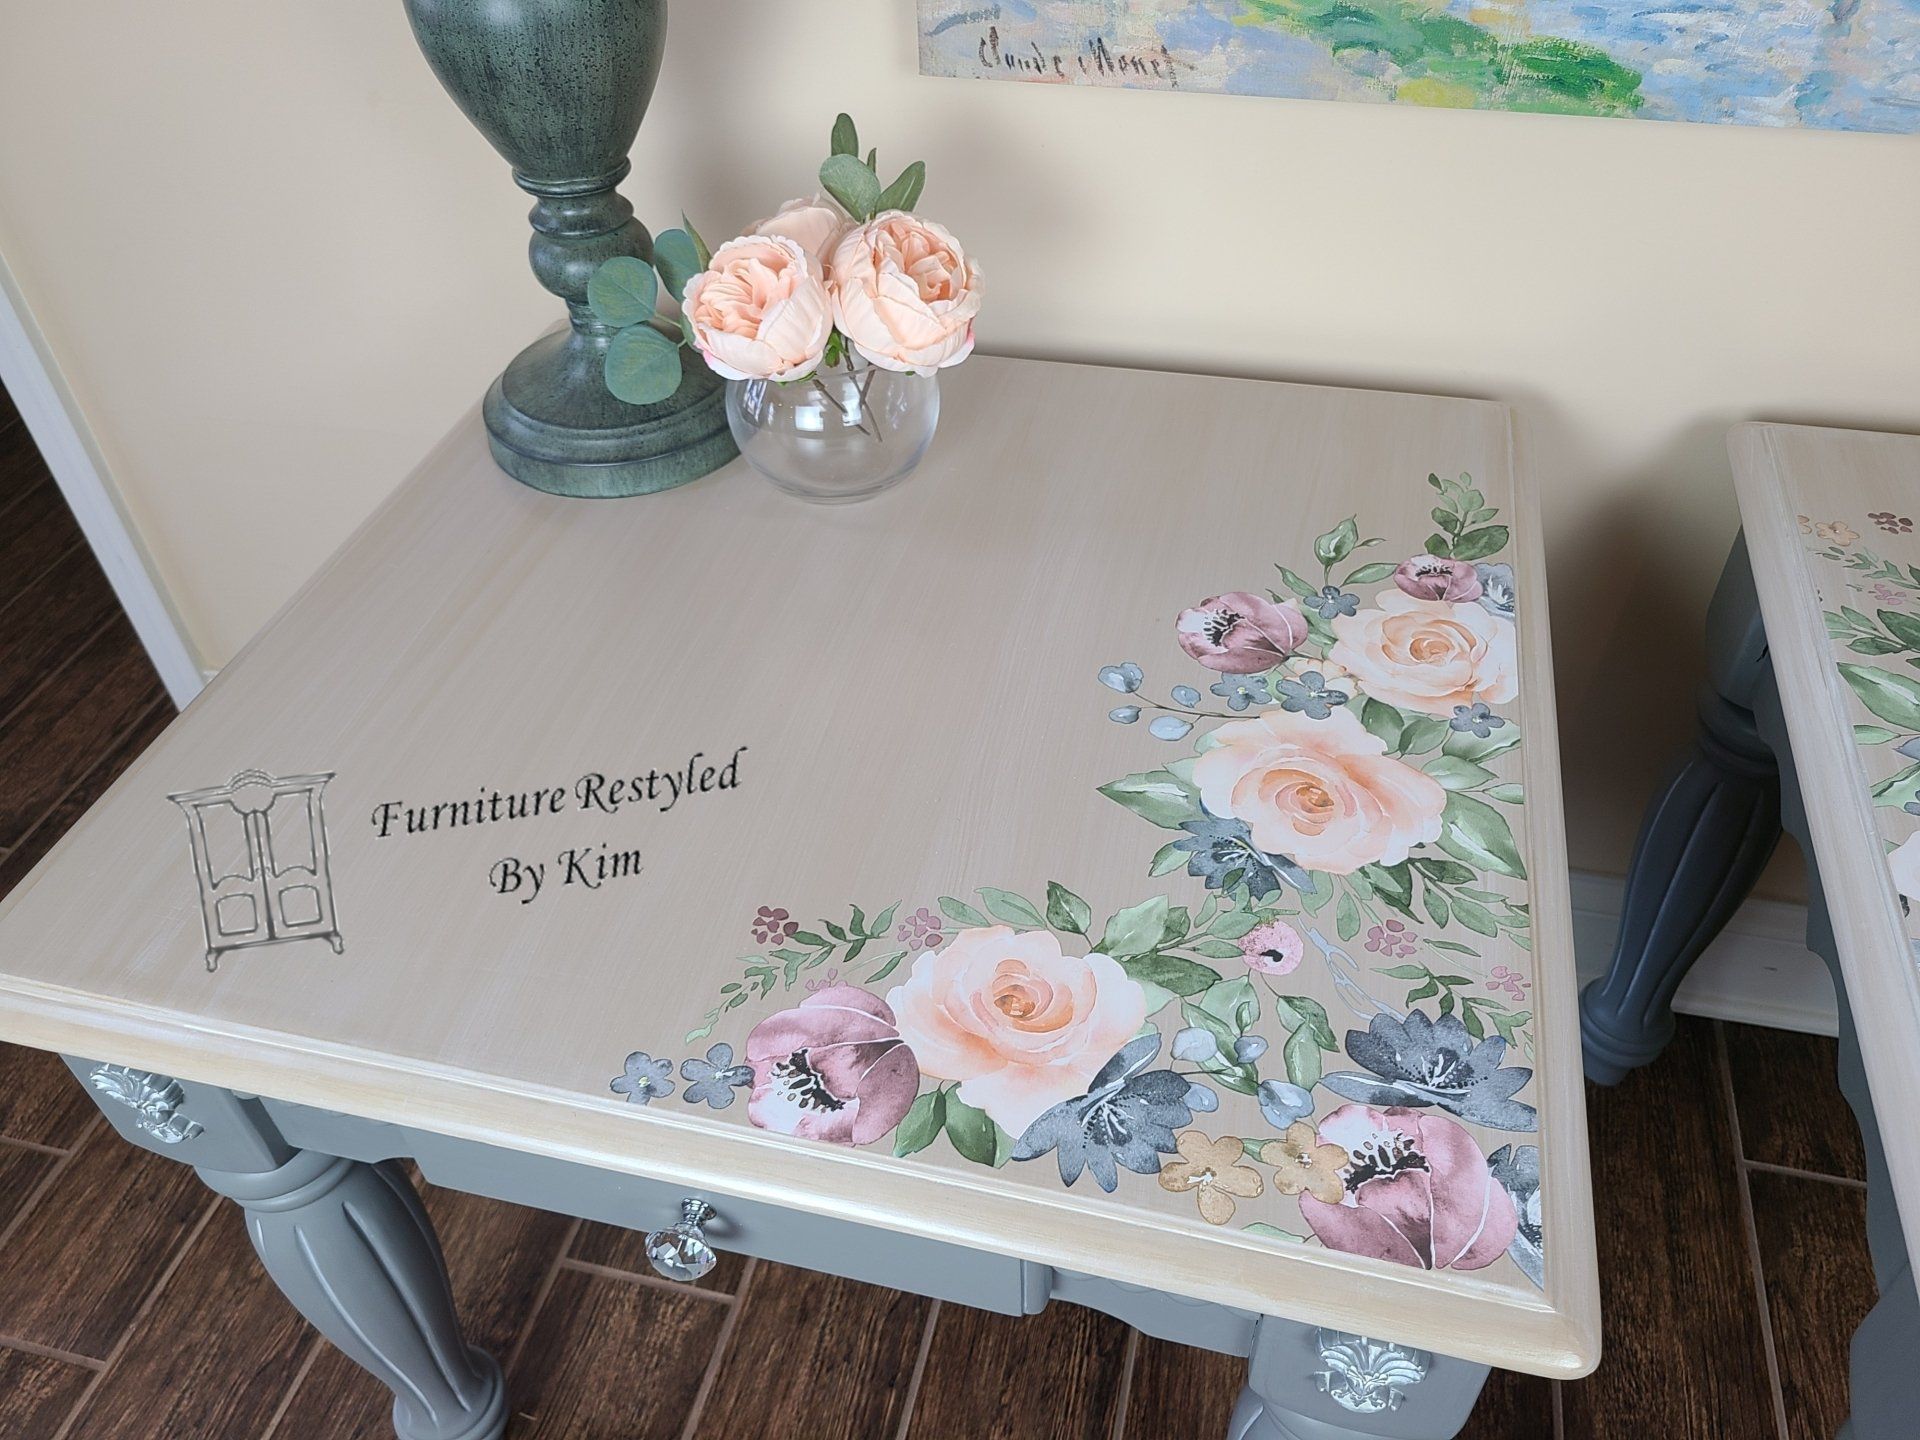 gray and cream table with rose paintings